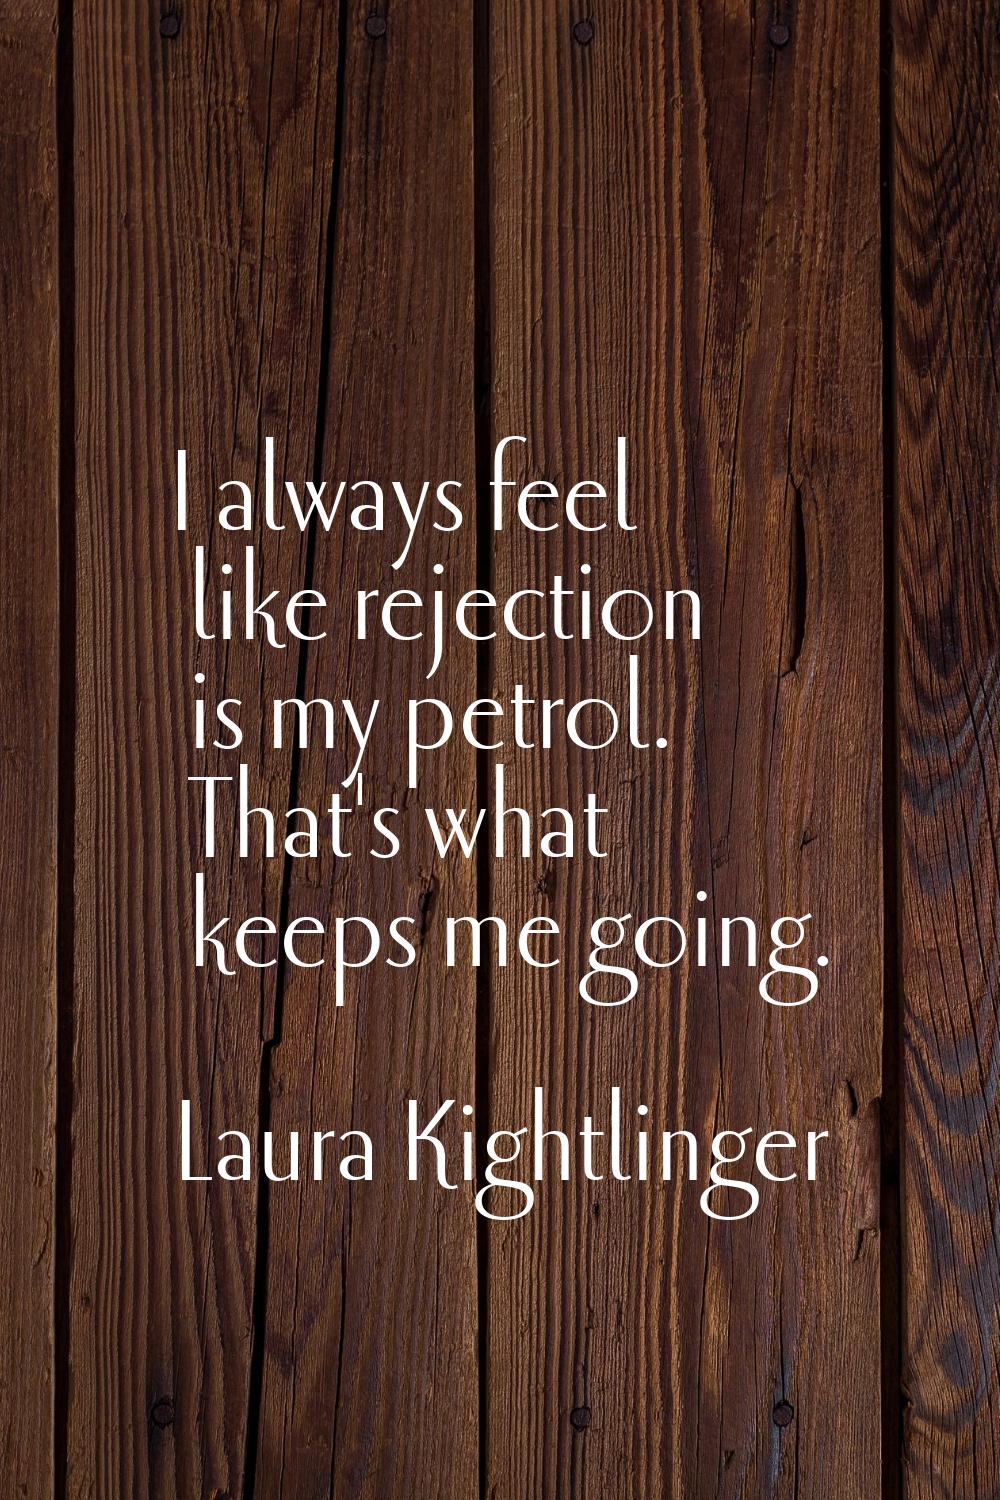 I always feel like rejection is my petrol. That's what keeps me going.